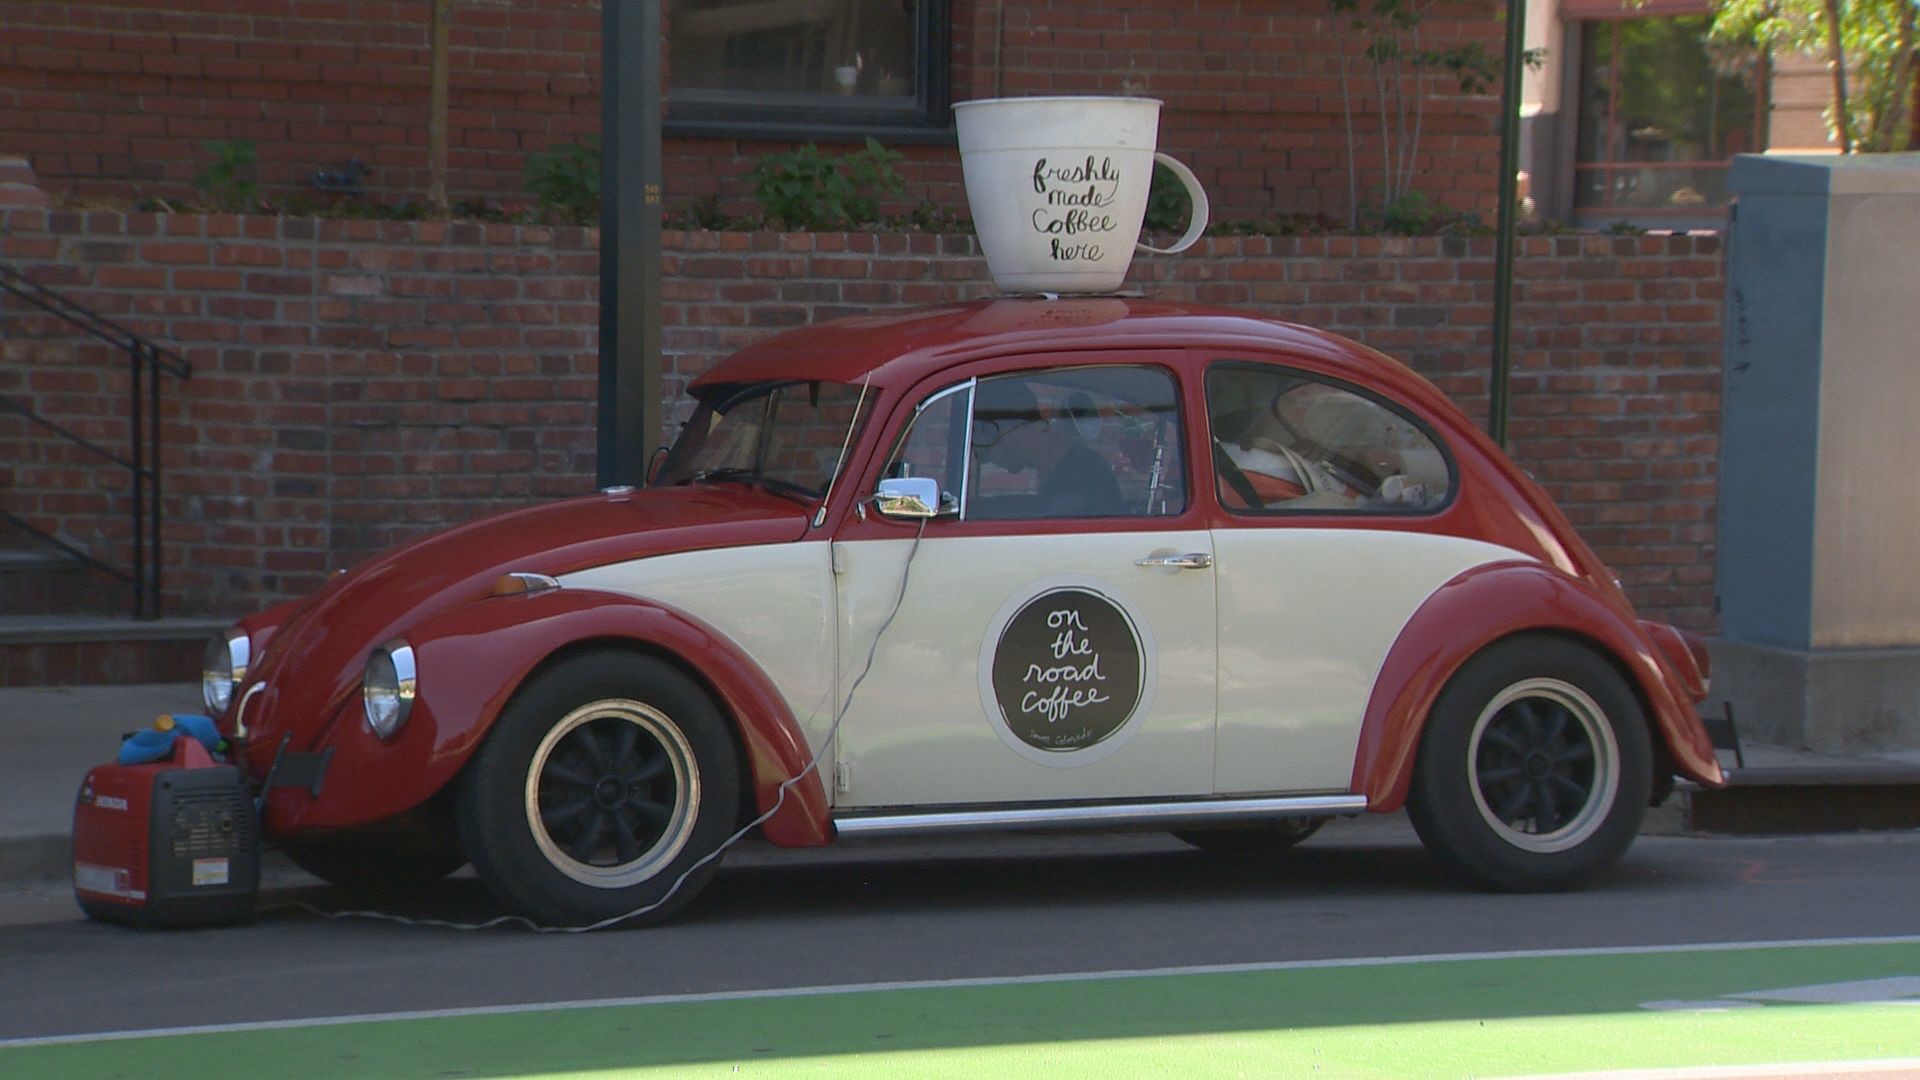 If you're looking to find a great coffee shop in Denver, have you considered looking in someone's car?